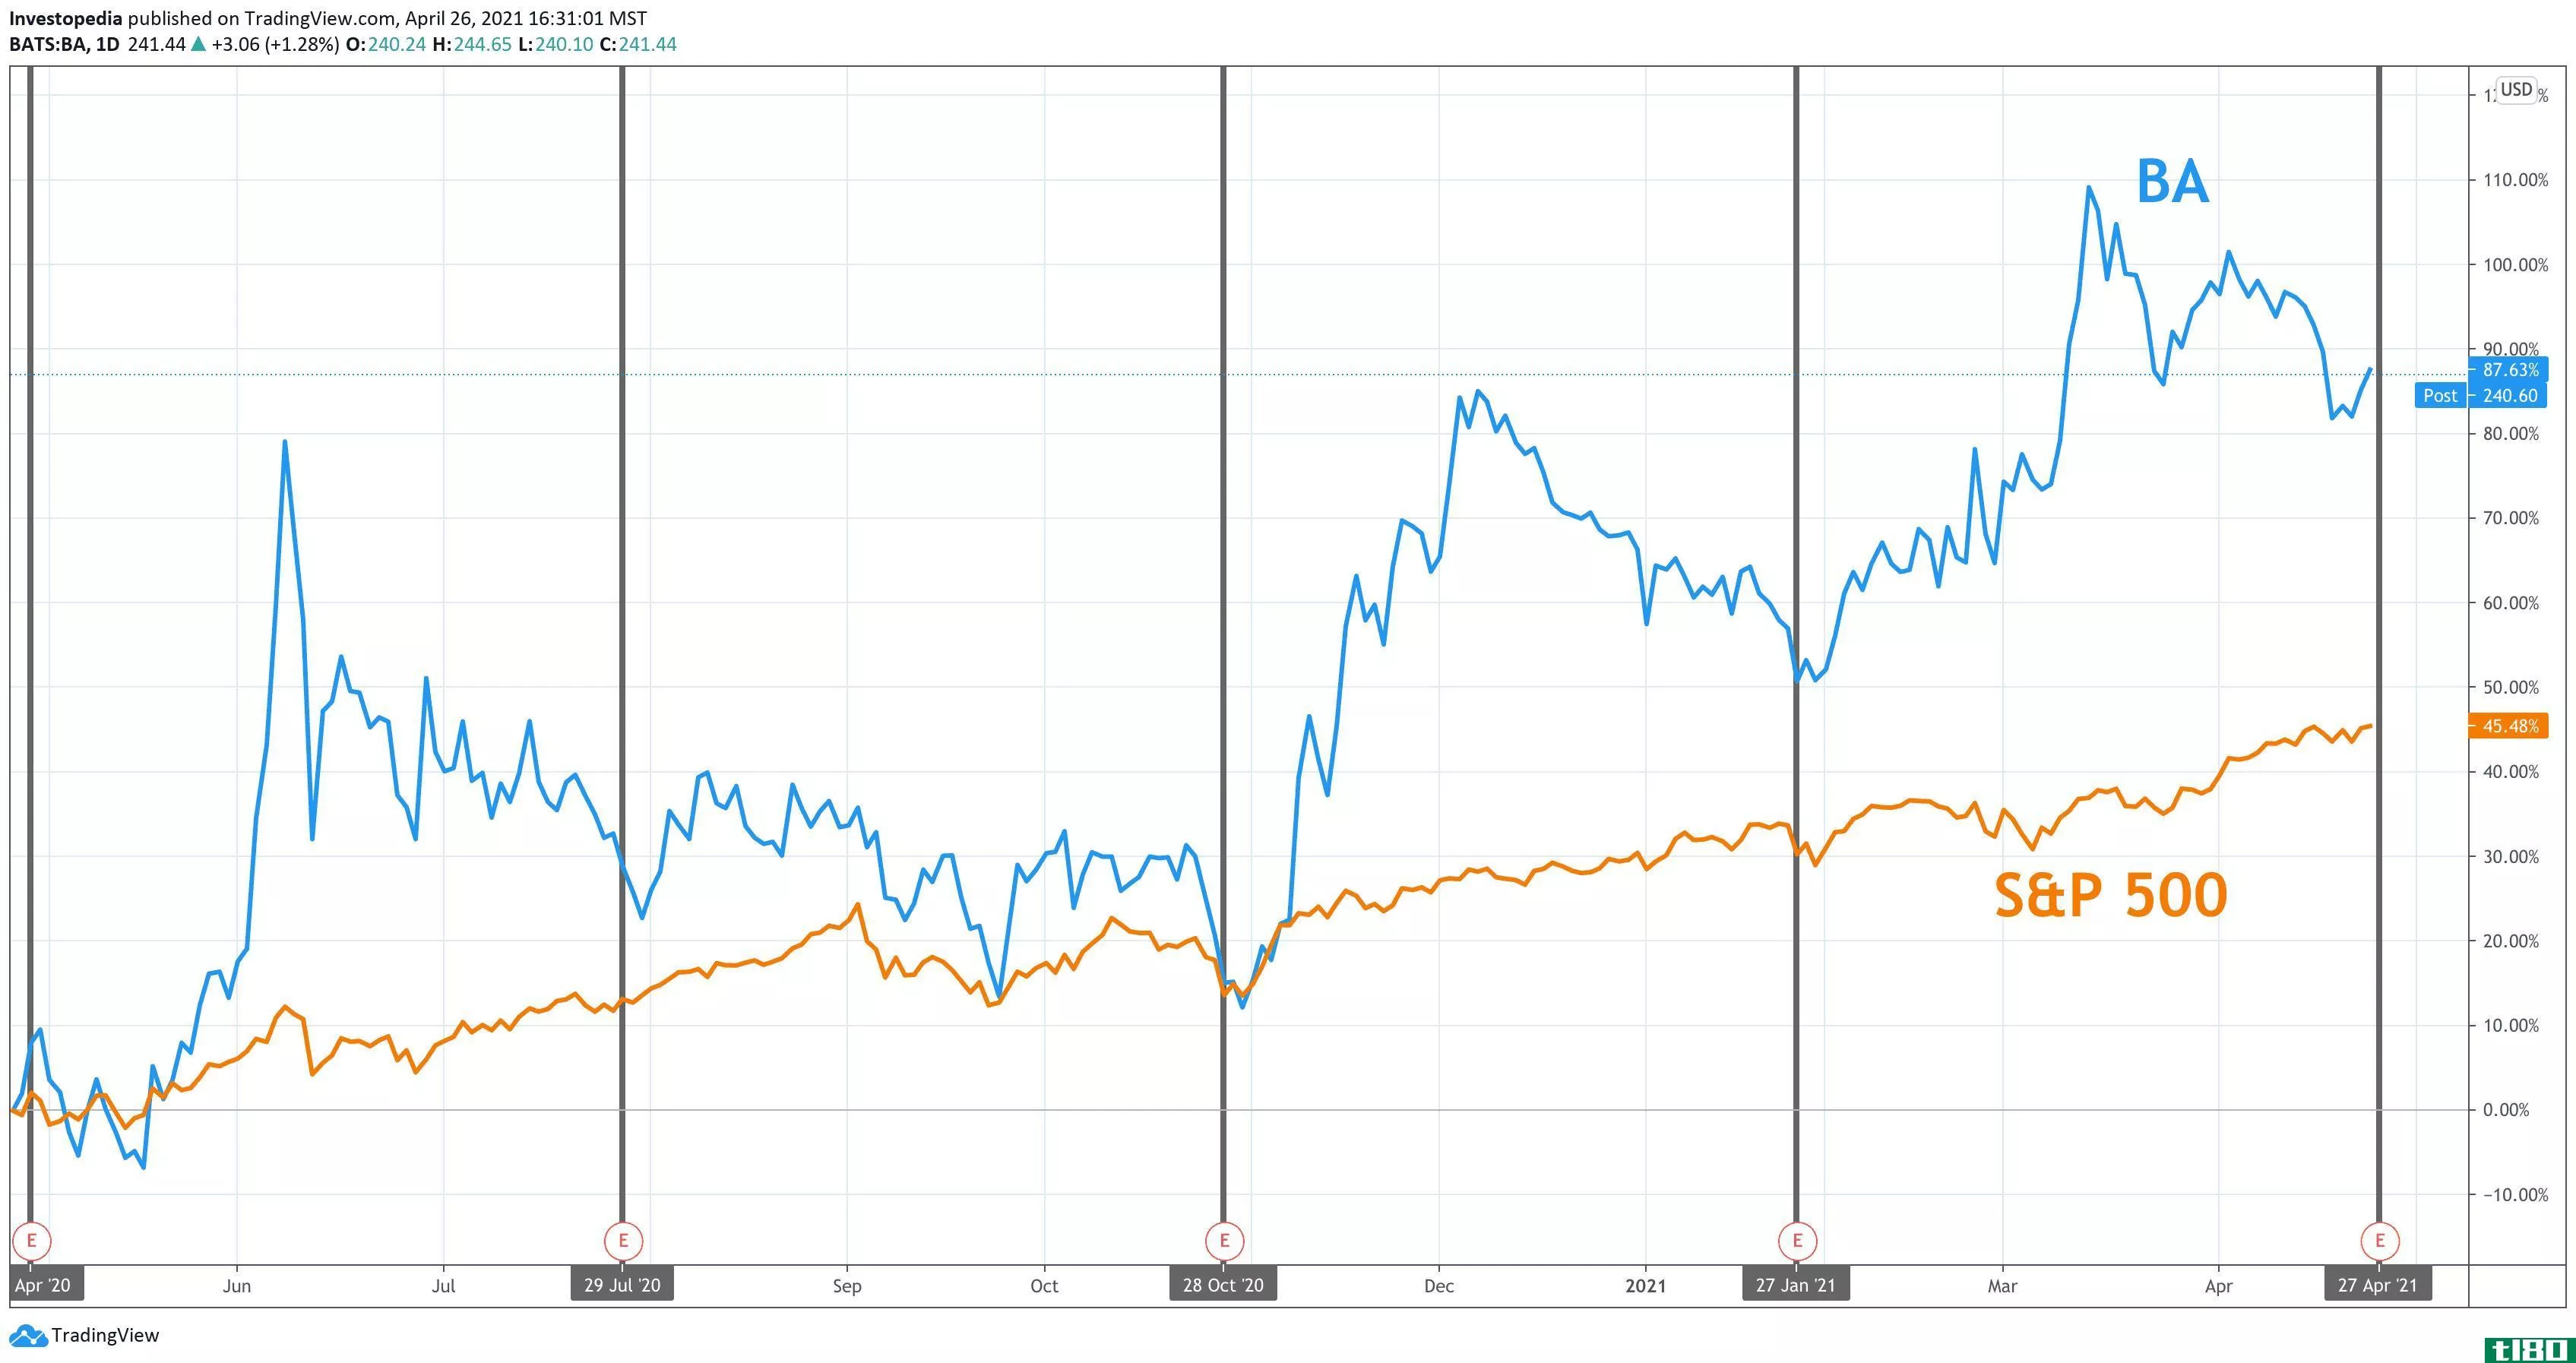 One Year Total Return for S&P 500 and Boeing